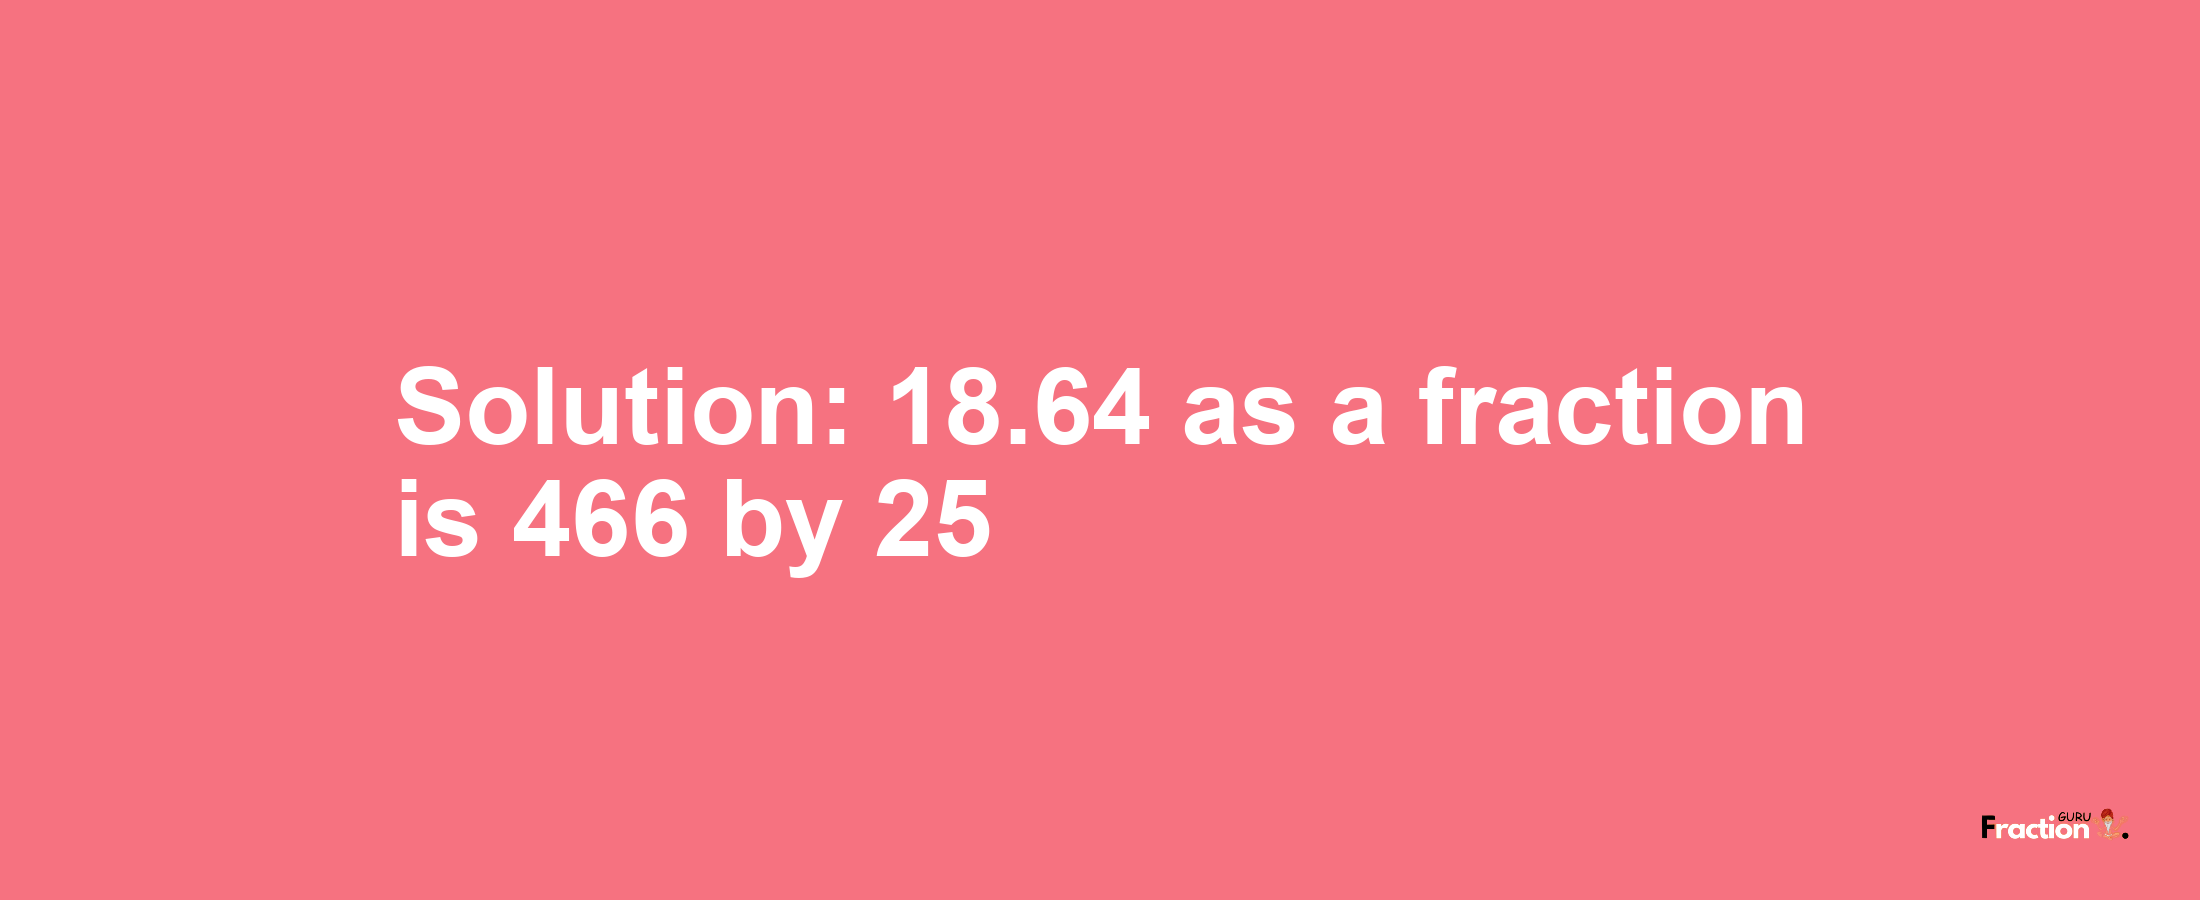 Solution:18.64 as a fraction is 466/25